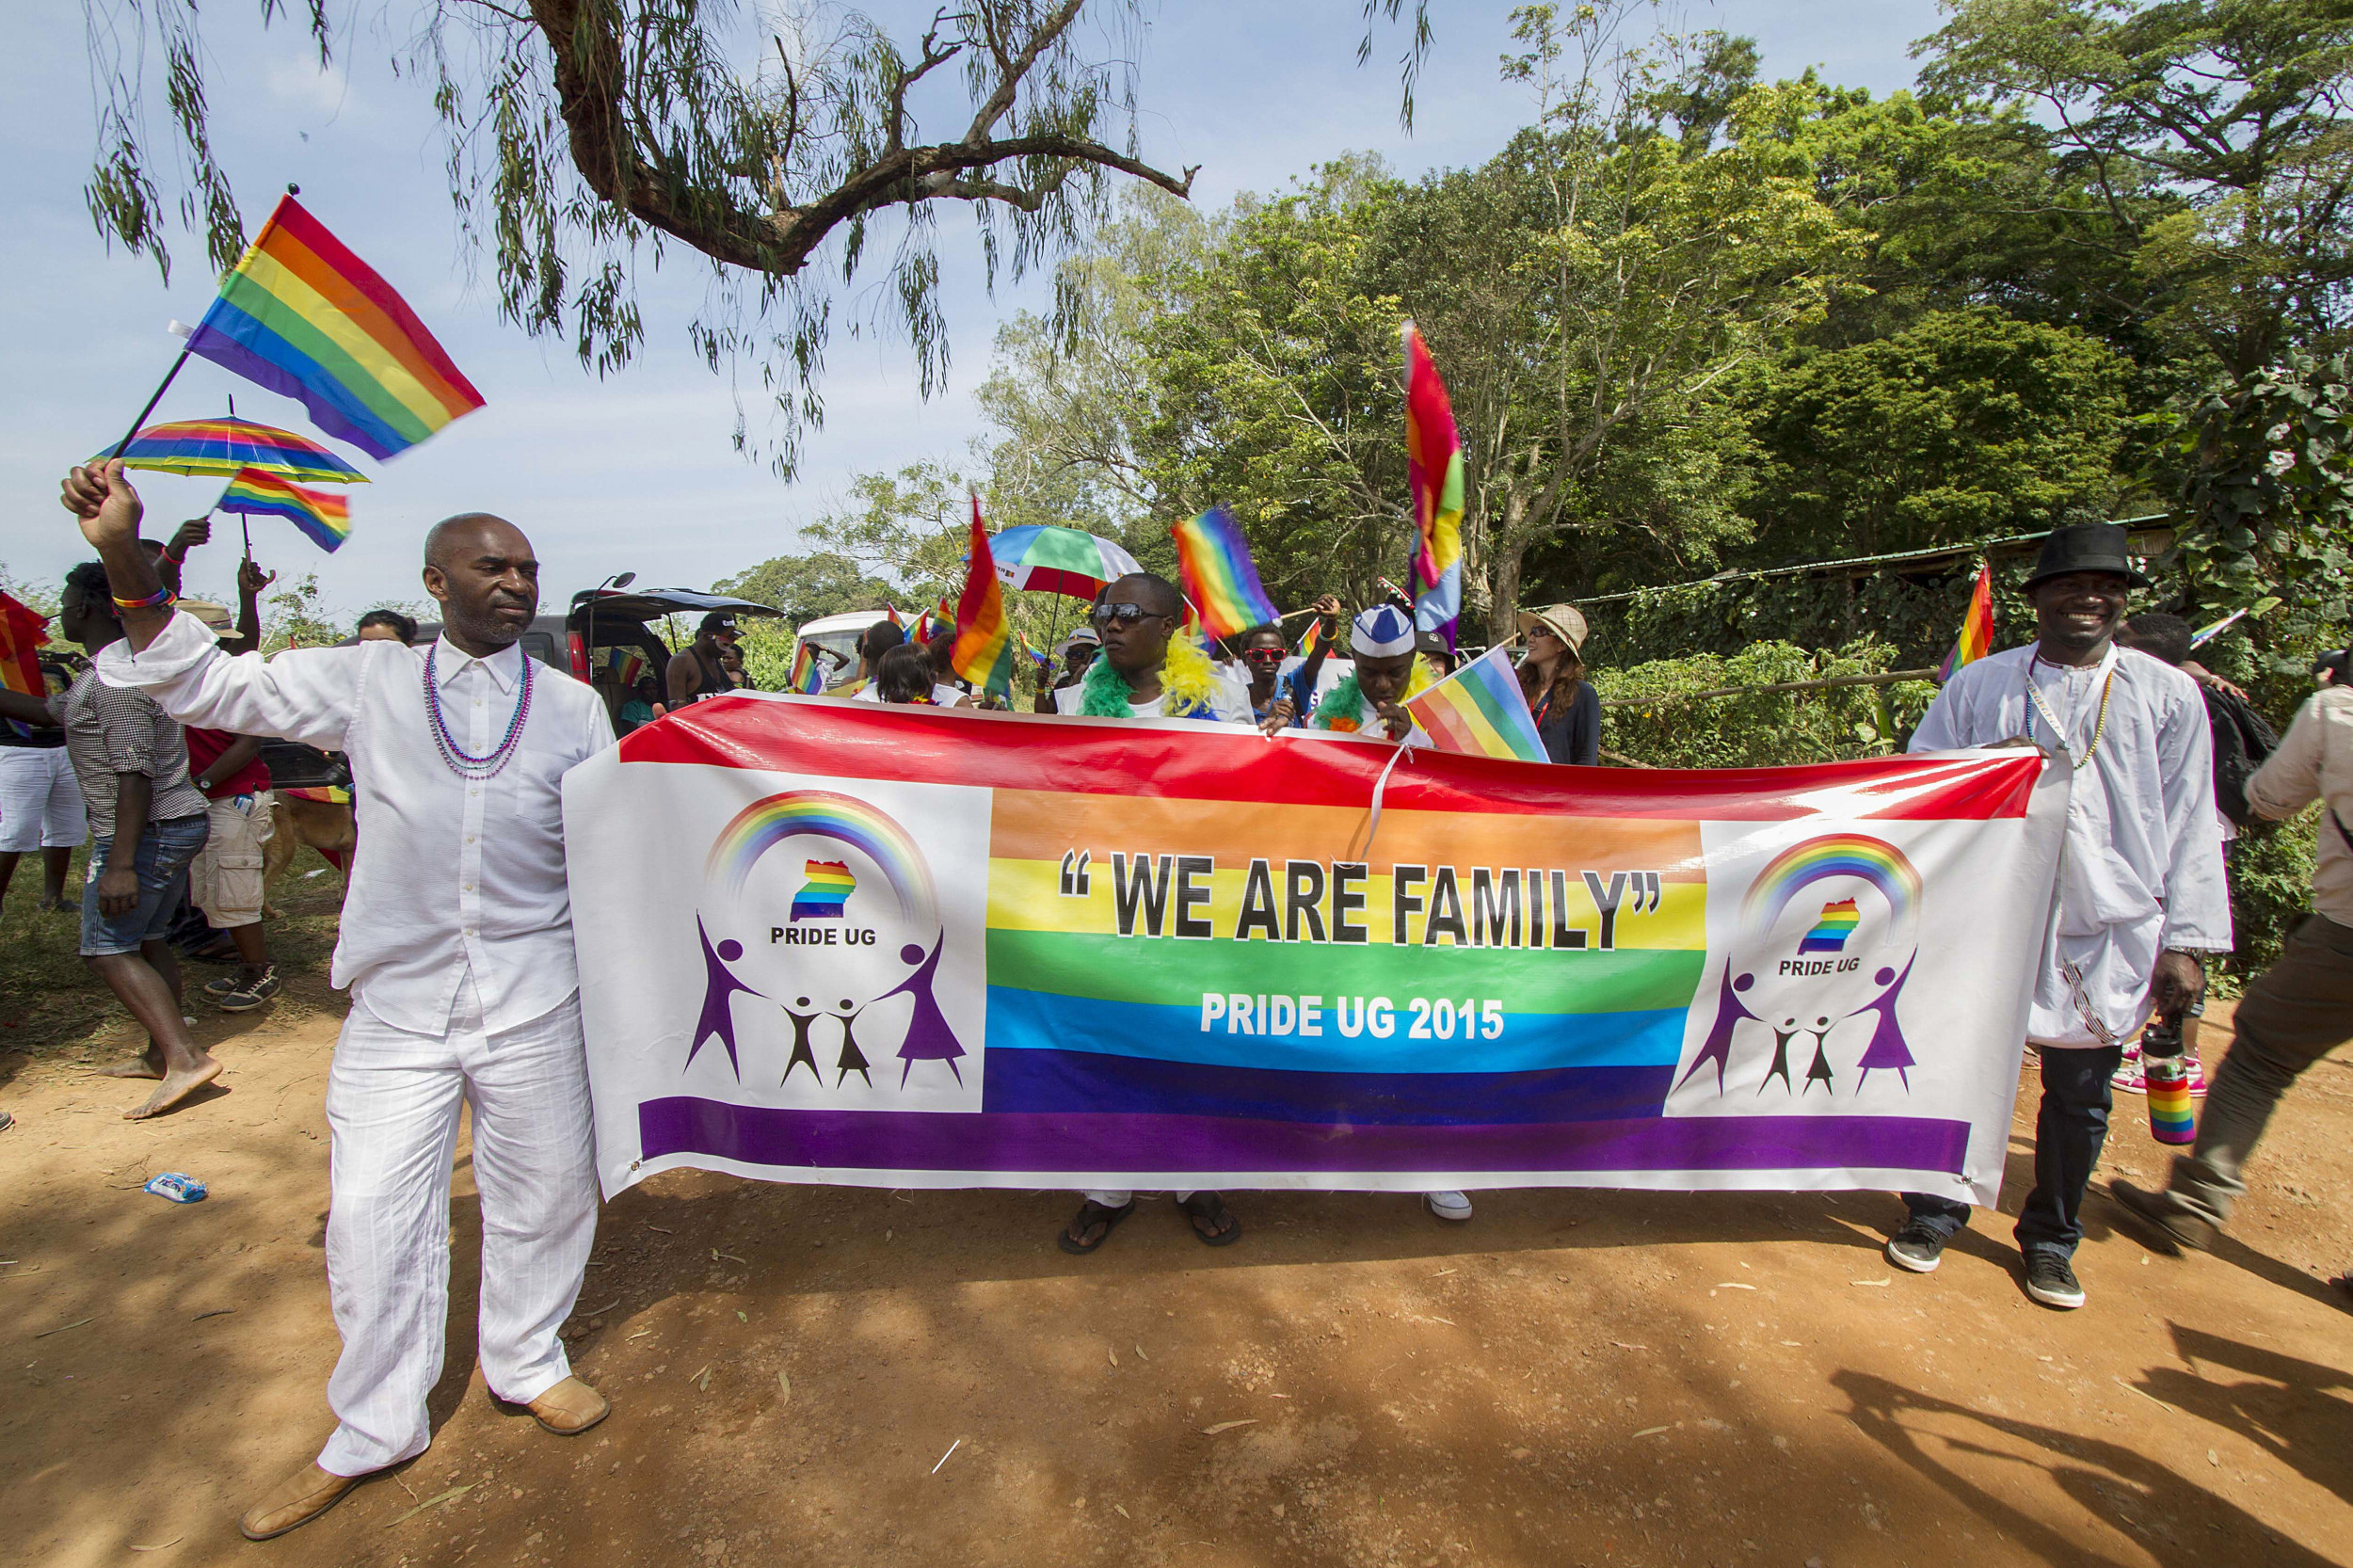 Lgbt Activists In Uganda Taken Into Custody For Their Protection Subjected To Forced Anal